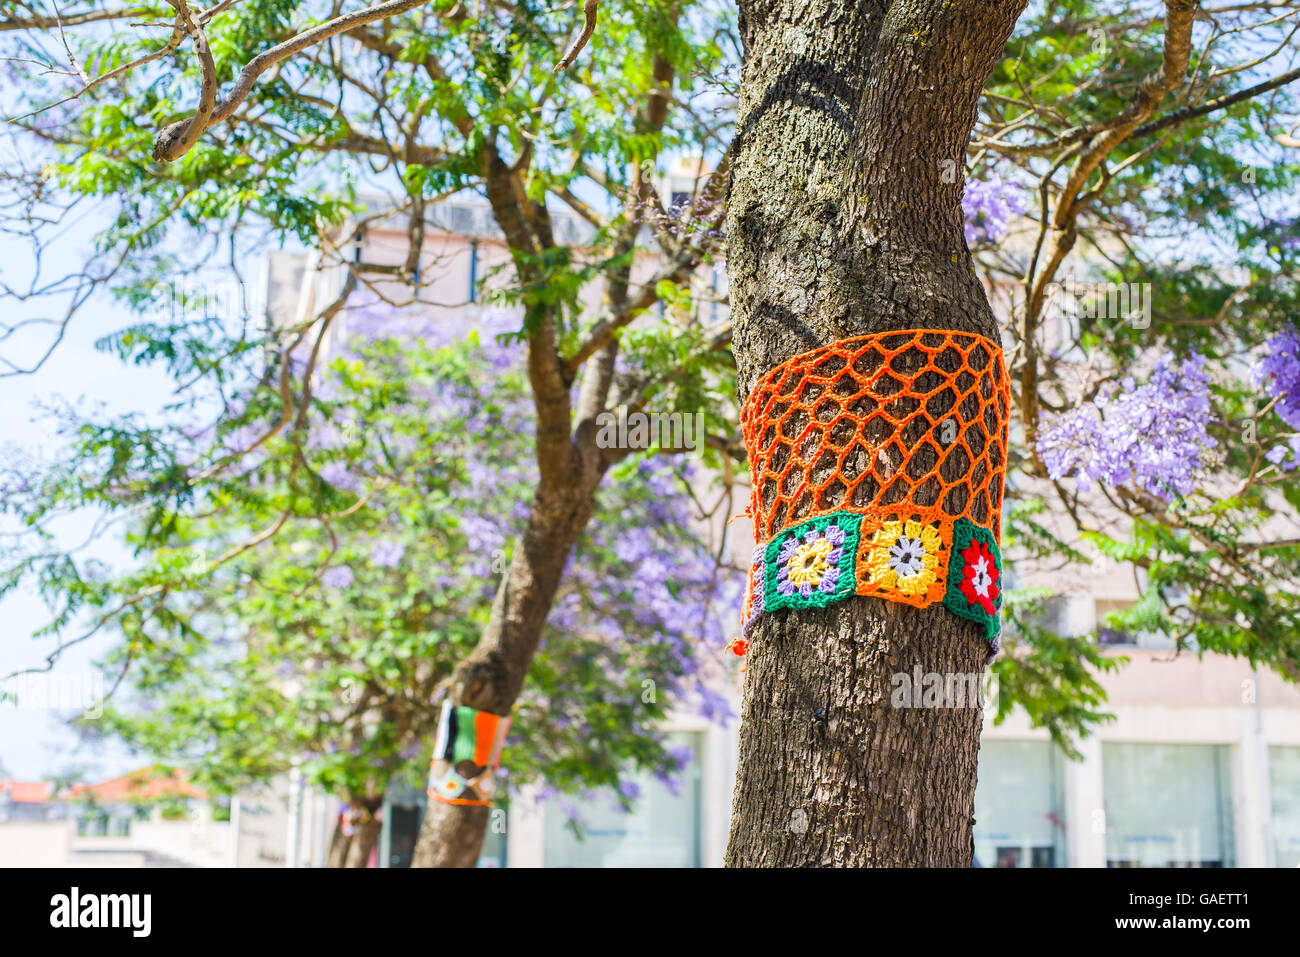 Yarn bombing. A tree dressed with knitted colorful wool. European park. Stock Photo